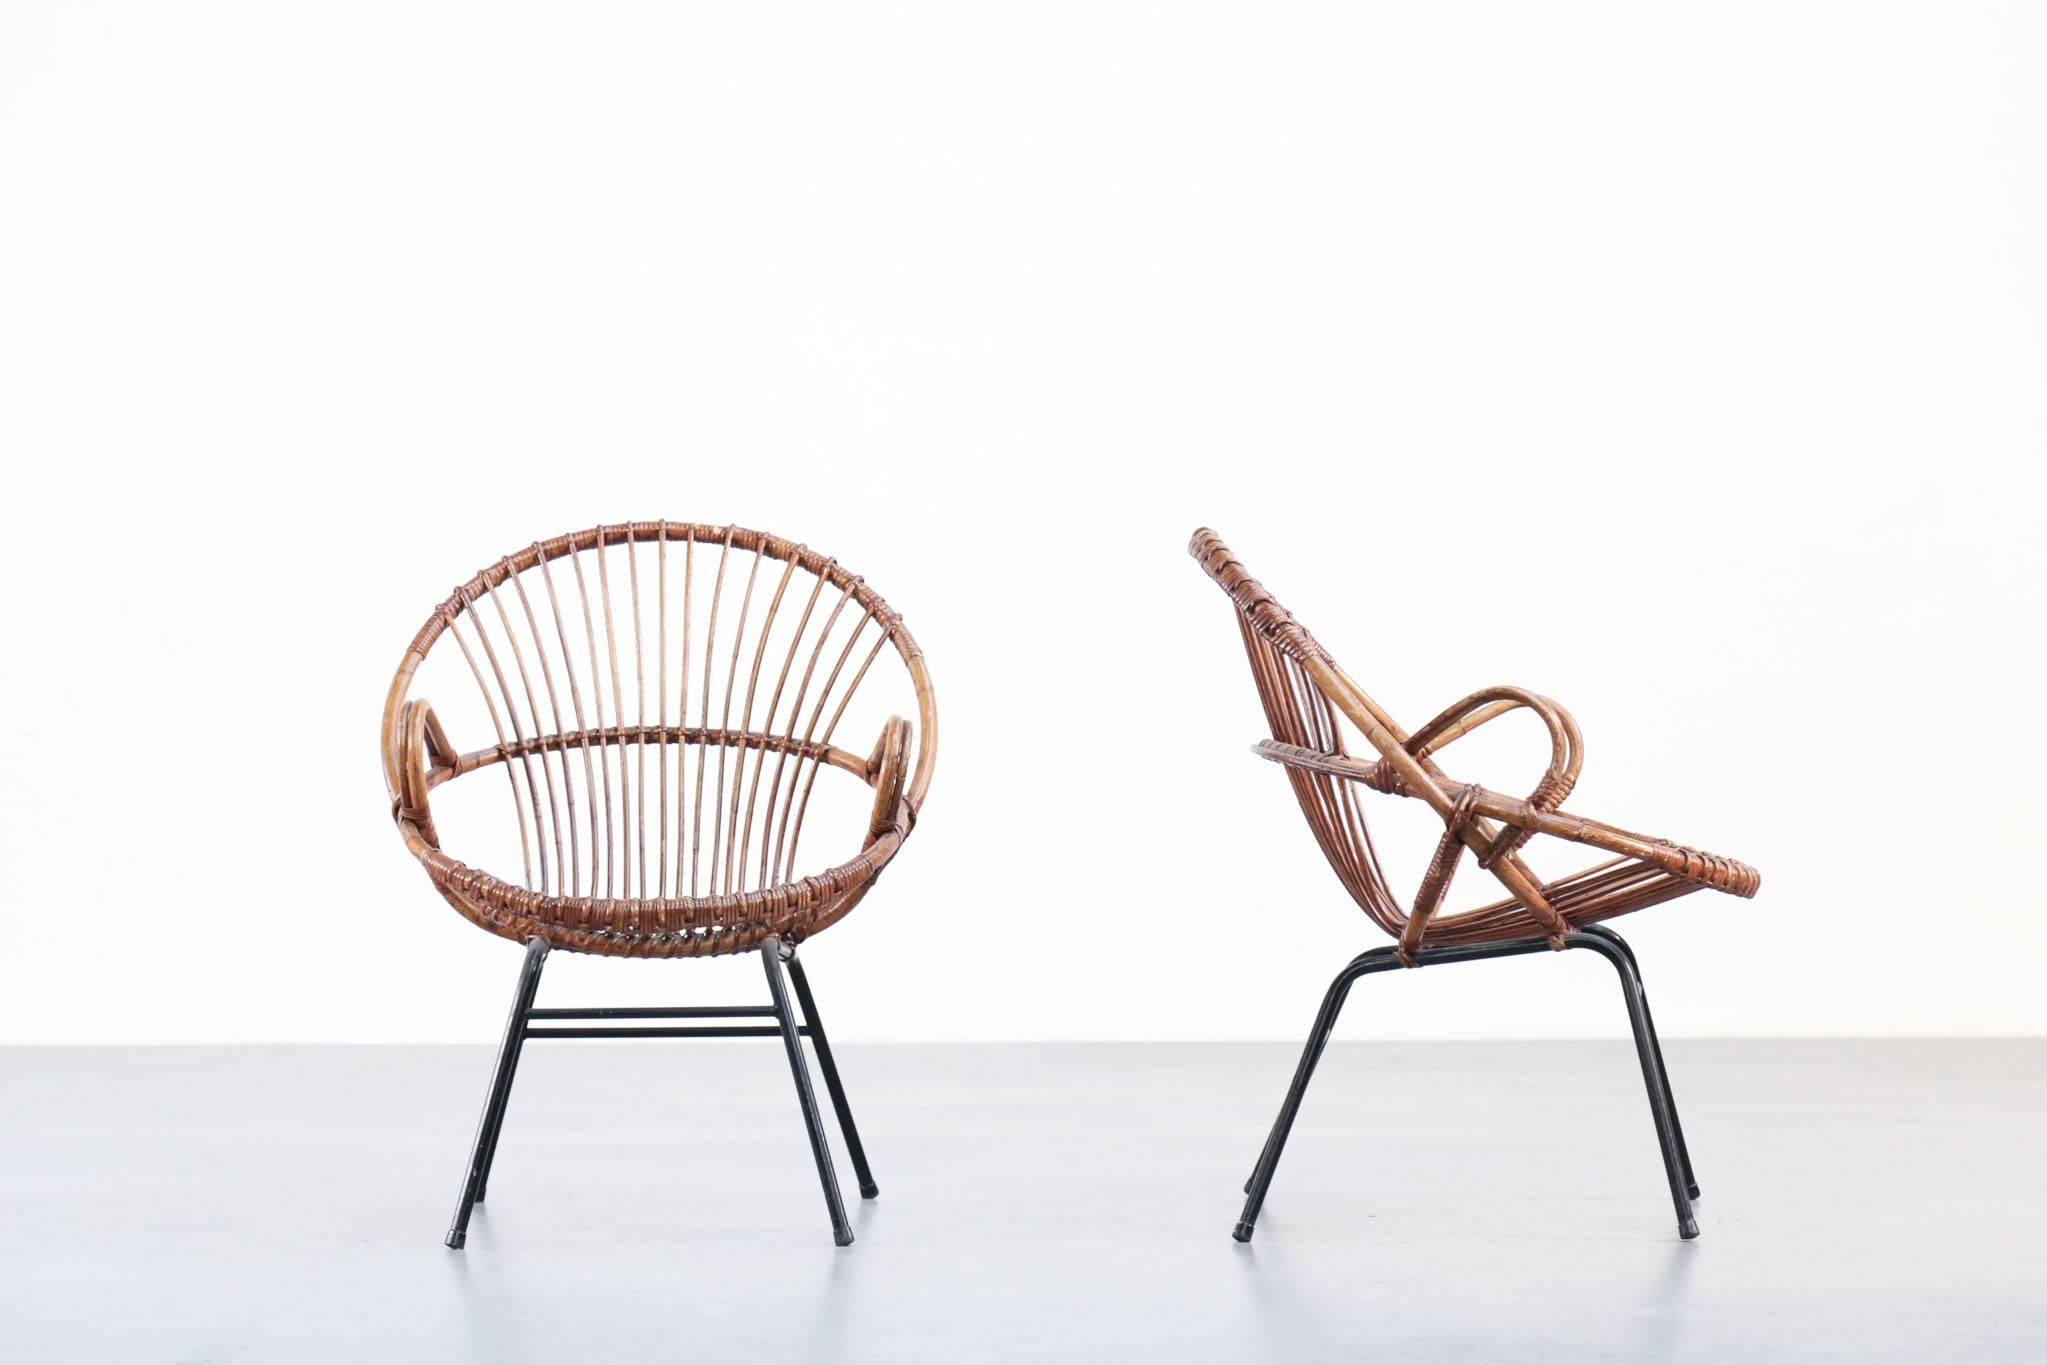 Pair of rattan armchair composed with black metal legs.